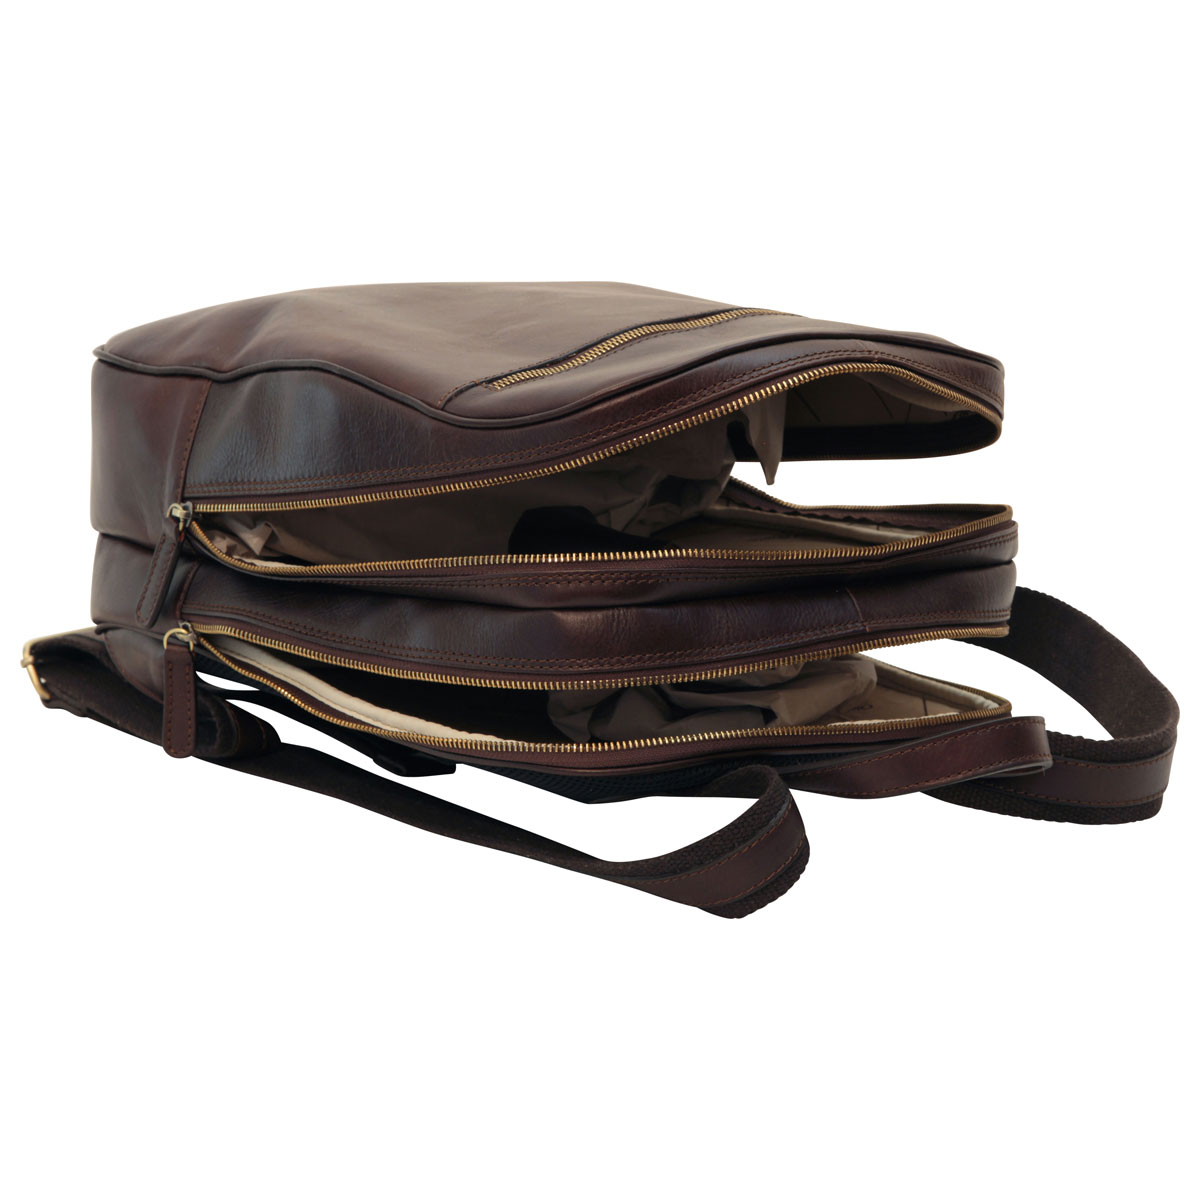 Leather backpack with exterior zip pockets - Dark Brown | 408089TM | EURO | Old Angler Firenze